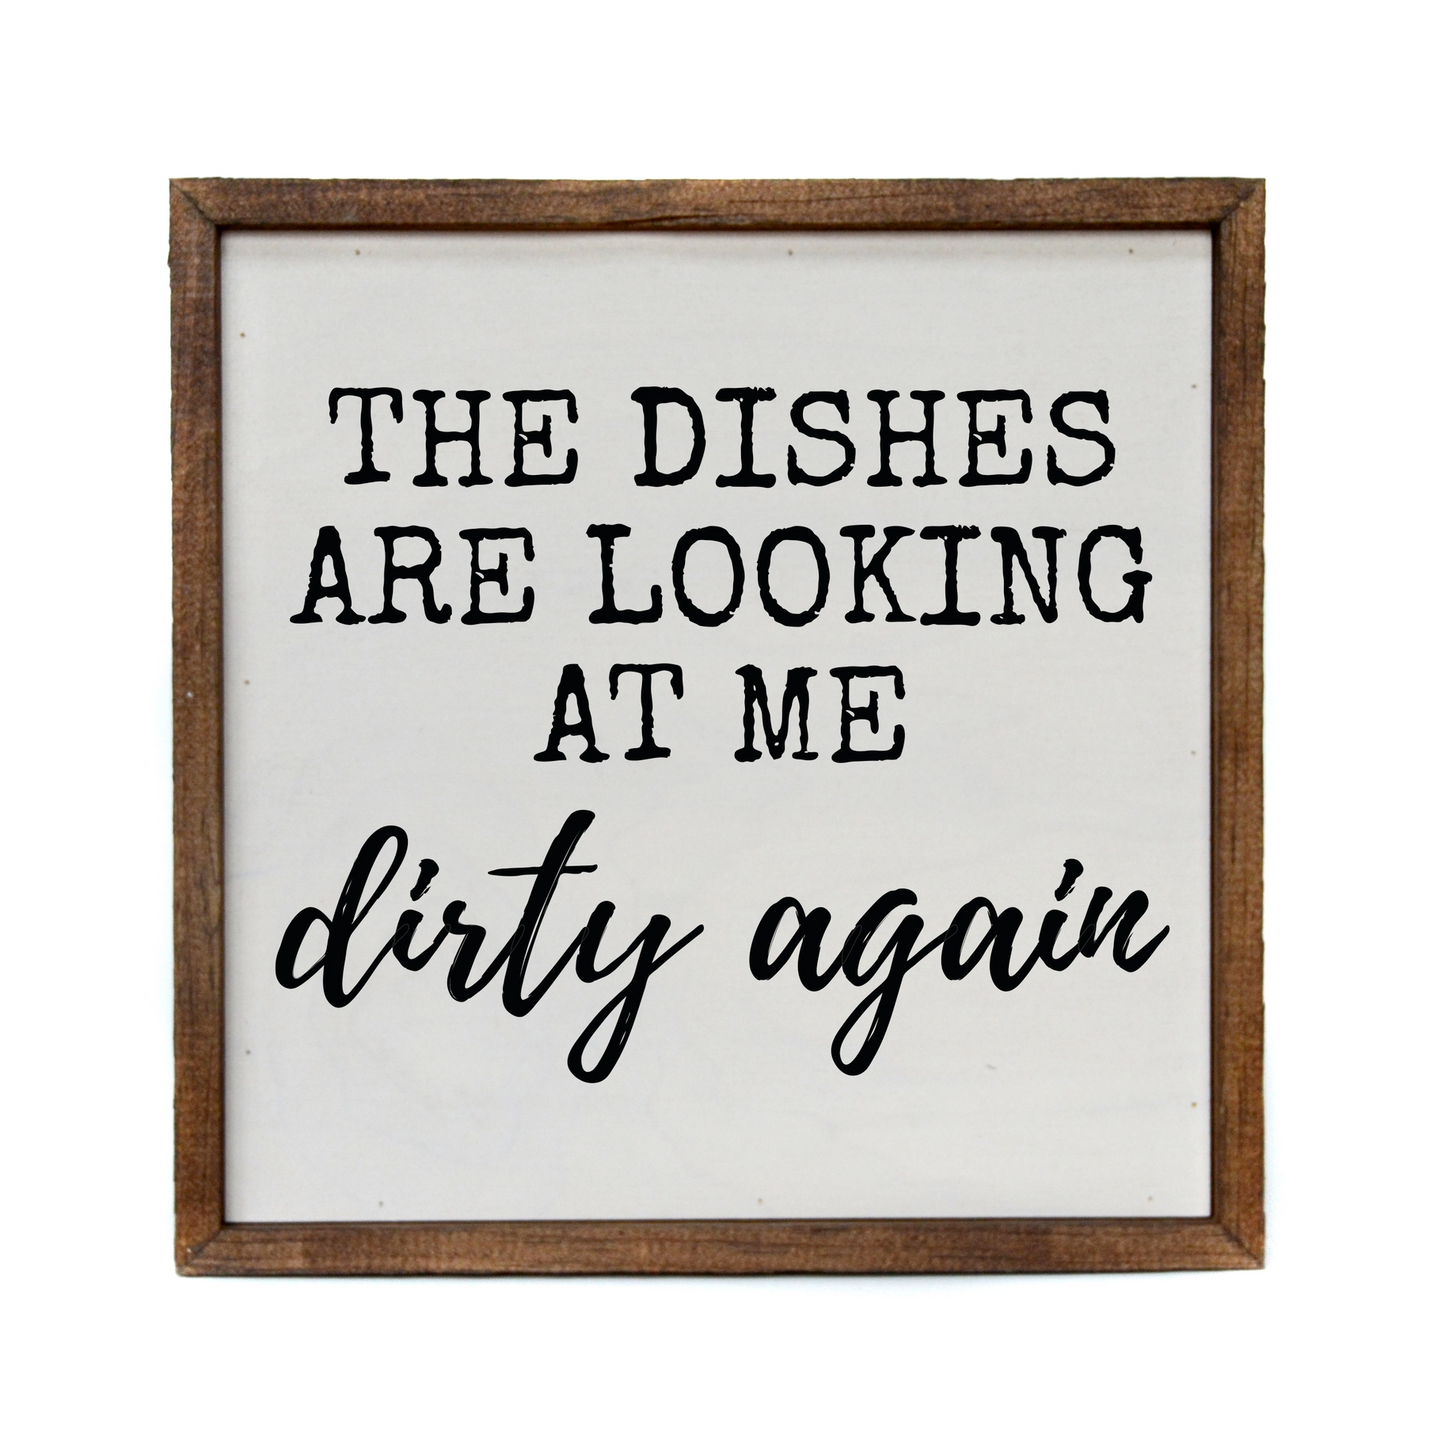 10x10 The Dishes Are Looking At Me Dirty Again Sign